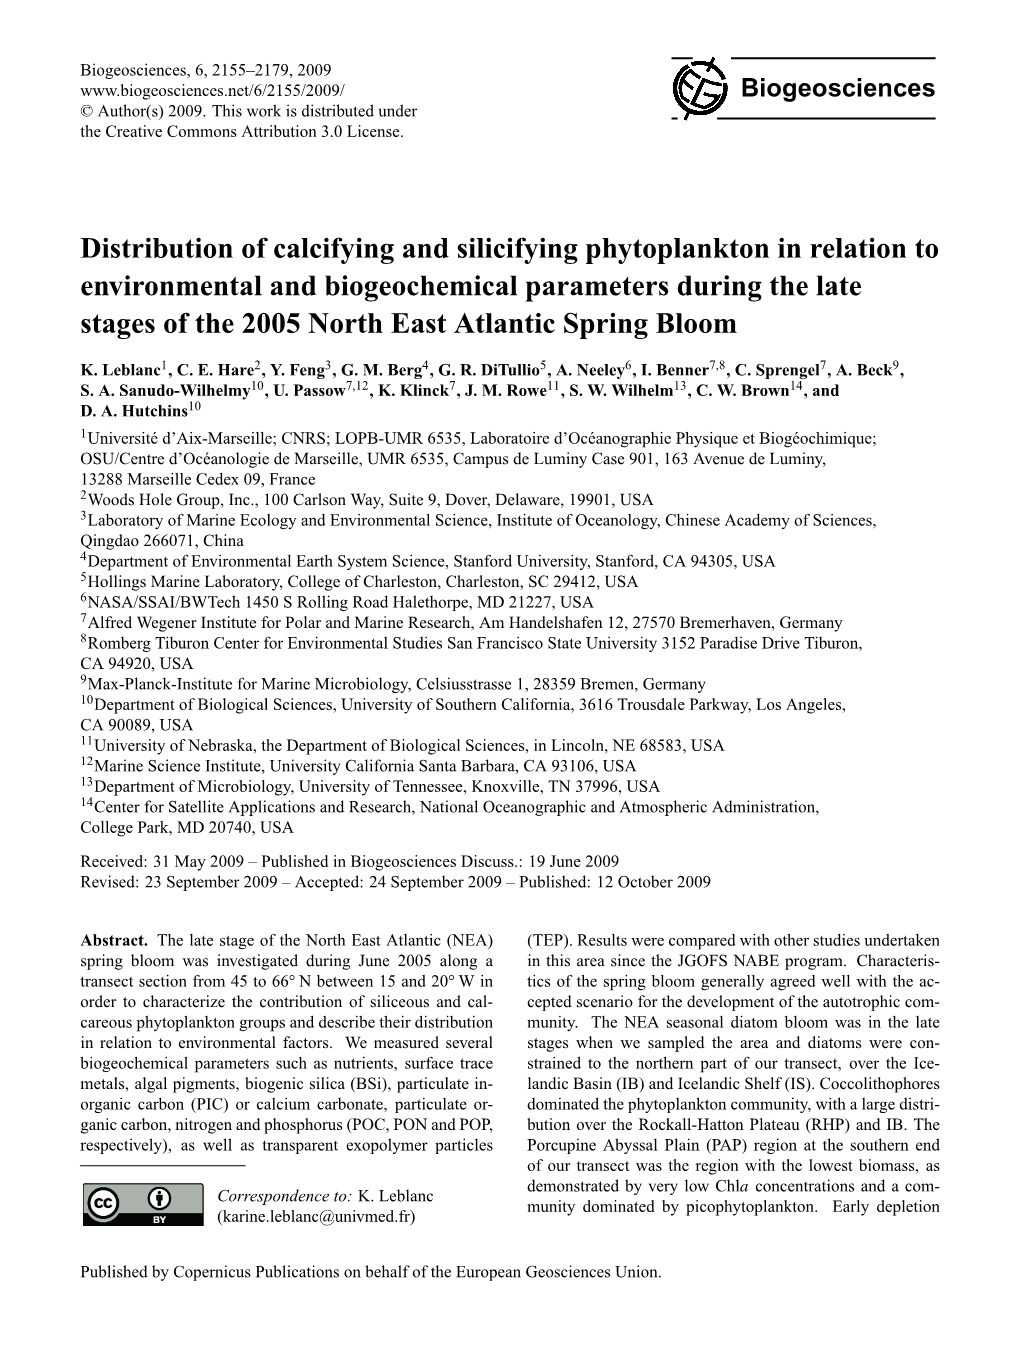 Distribution of Calcifying and Silicifying Phytoplankton in Relation To